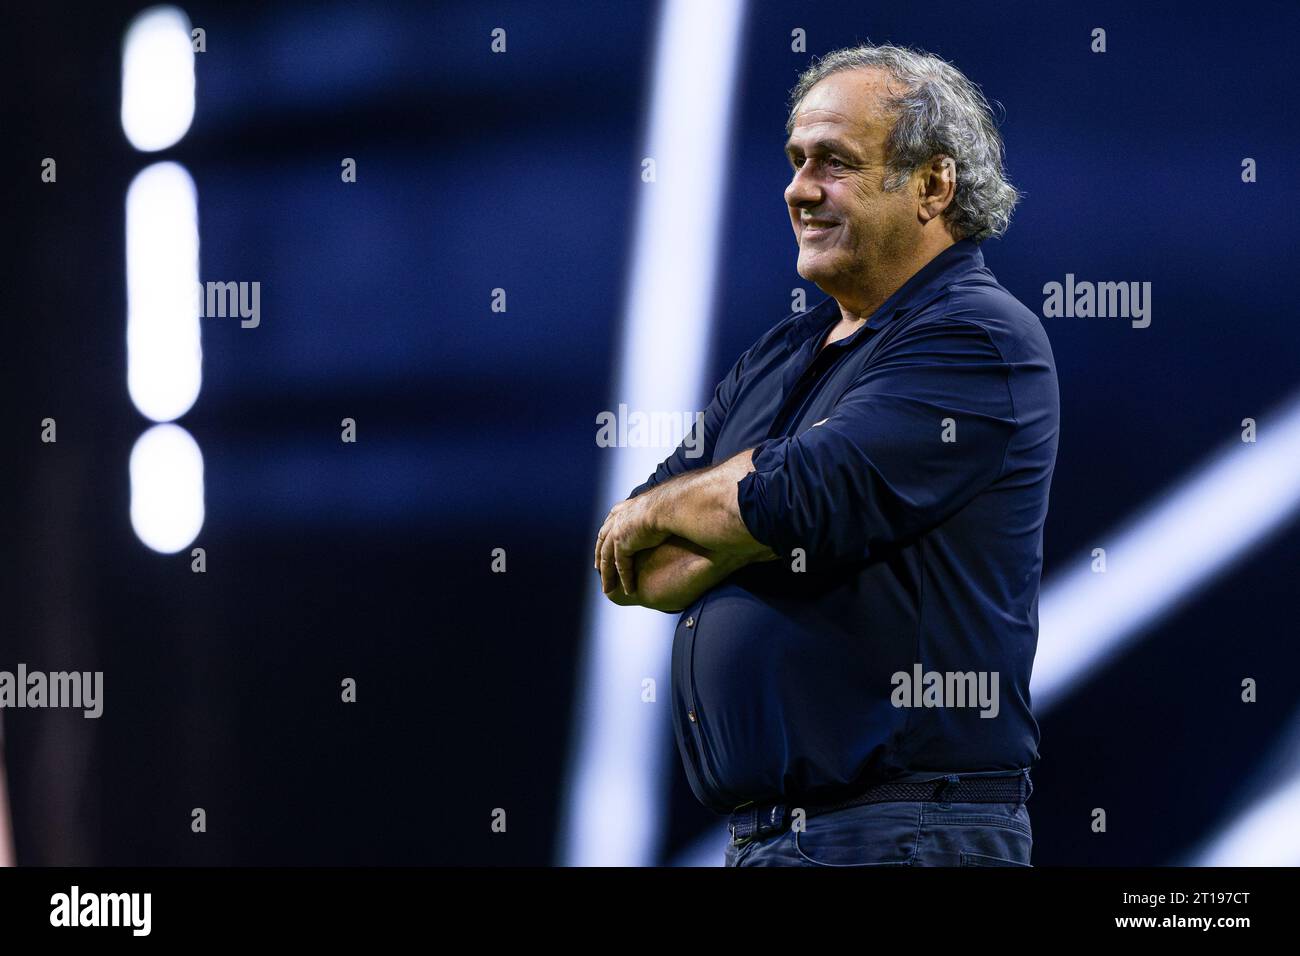 Michel Platini during the 'Together, a Black & White Show', an event organized by Juventus FC as part of the celebrations for the 100 years of the Agnelli family as president of the club. Stock Photo